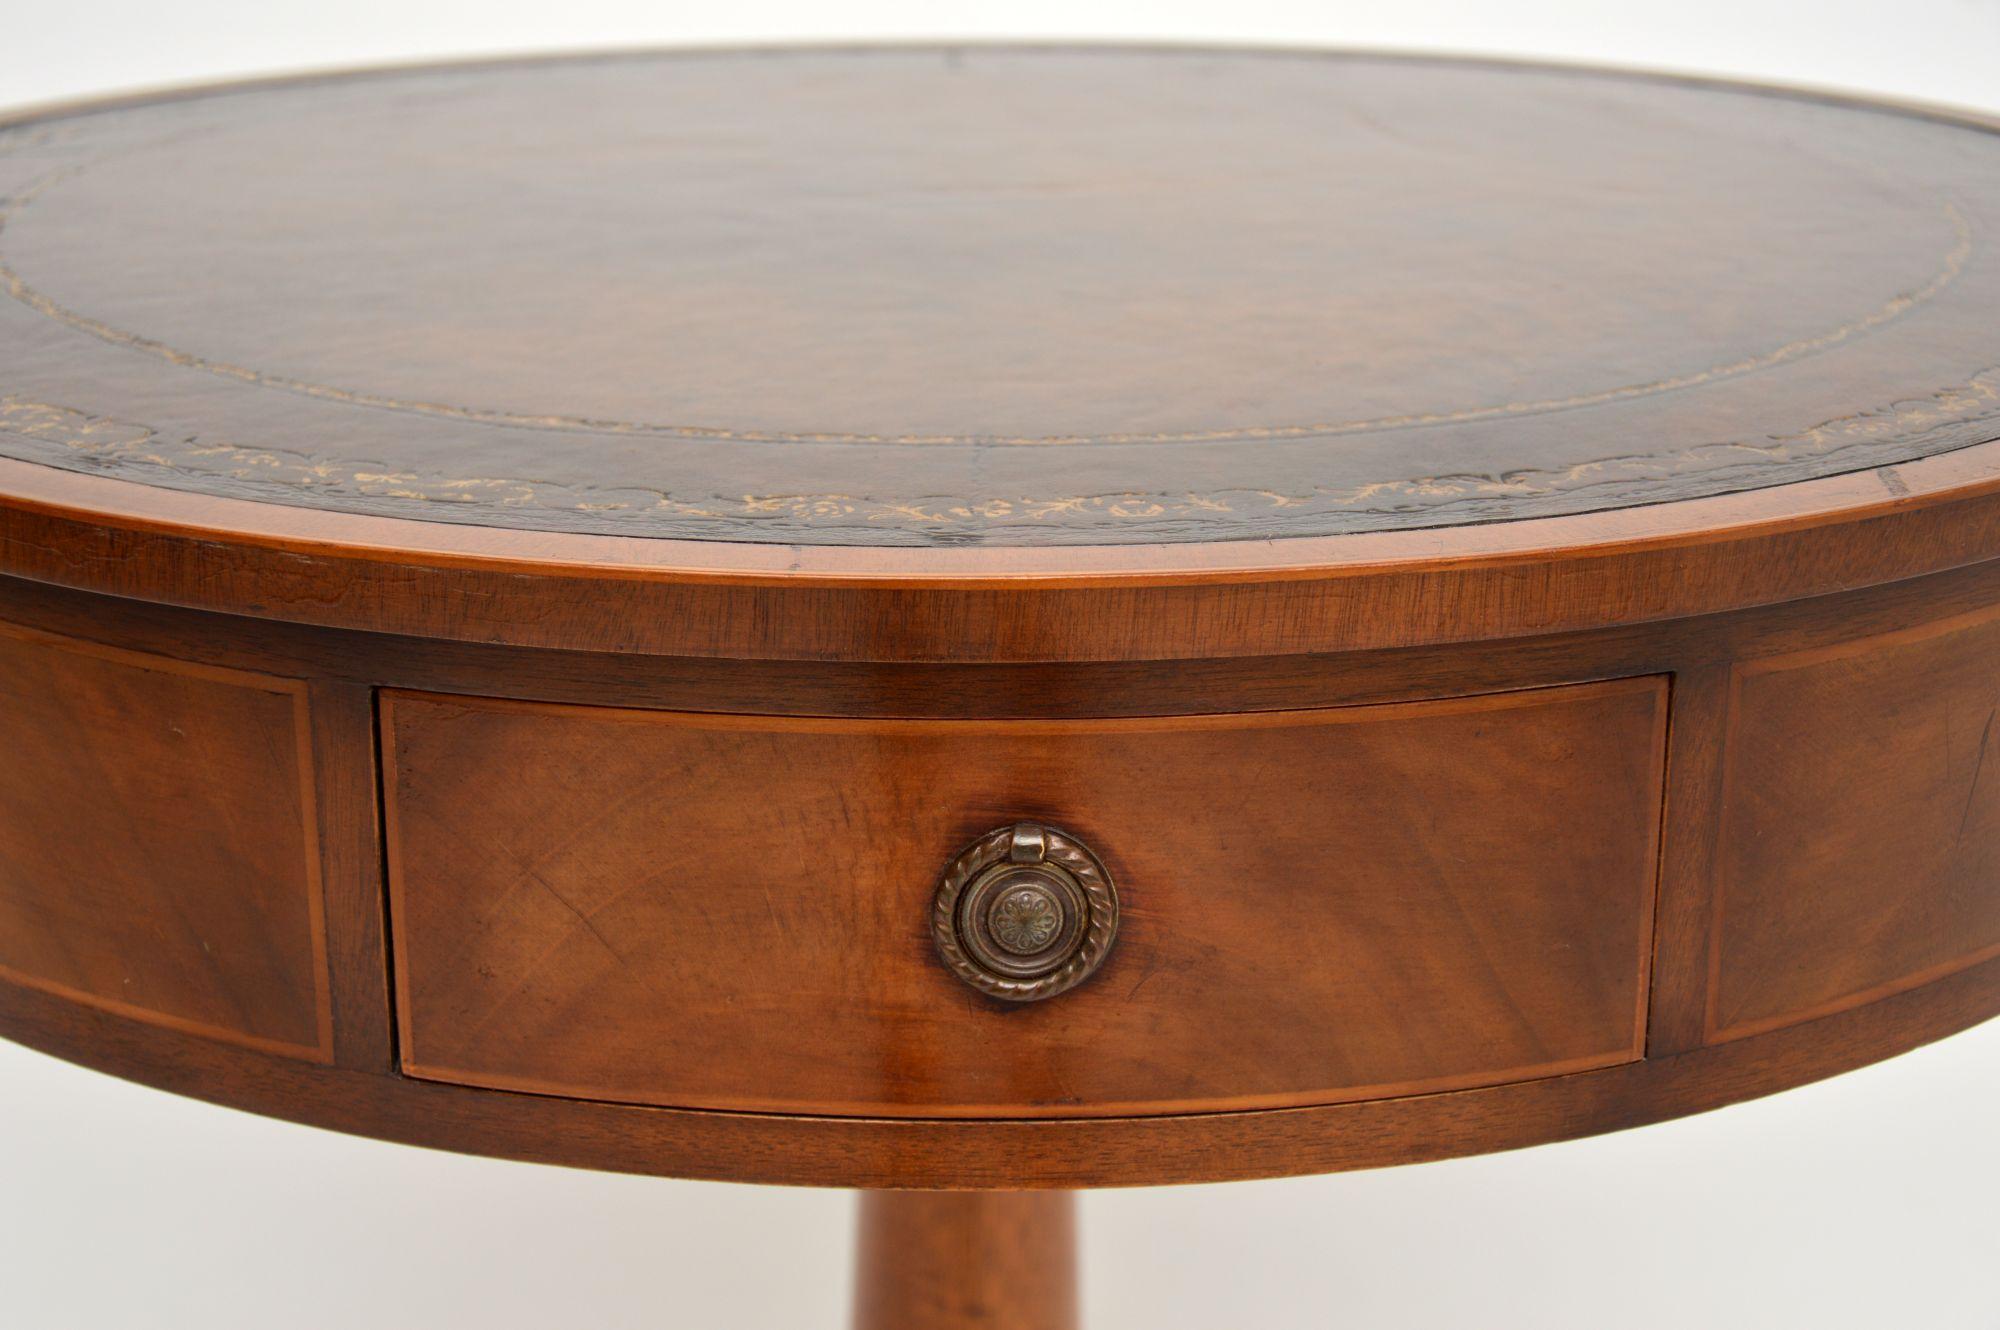 Early 20th Century Antique Regency Style Mahogany Leather Top Drum Table